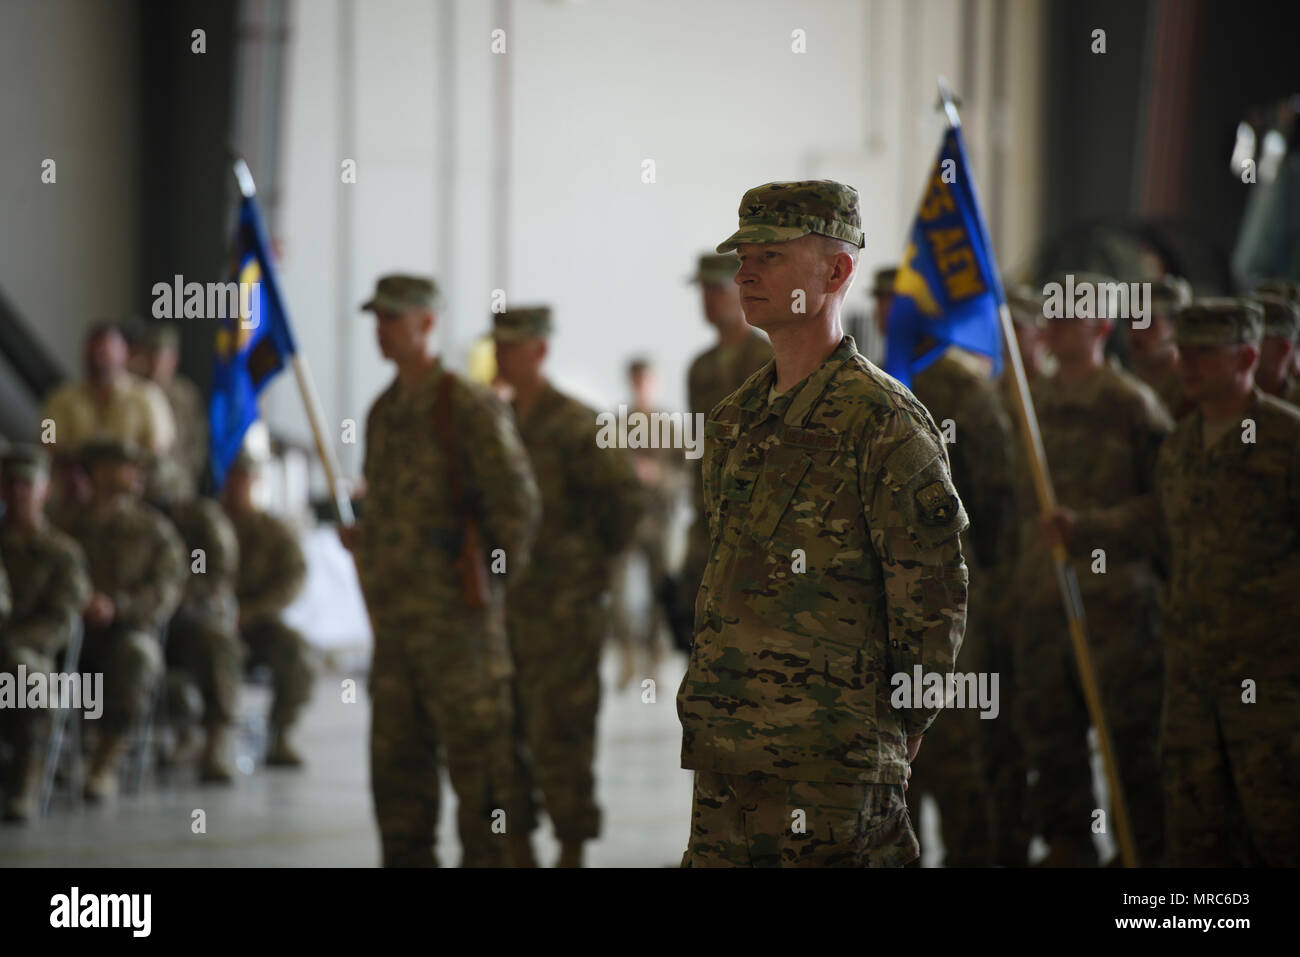 Col. William Burks, the 455th Air Expeditionary Wing vice commander, stands in formation during a change of command ceremony at Bagram Airfield, Afghanistan, June 3, 2017. Bagram Airfield welcomed its new commander, Brig. Gen. Craig Baker. (U.S. Air Force photo by Staff Sgt. Benjamin Gonsier) Stock Photo